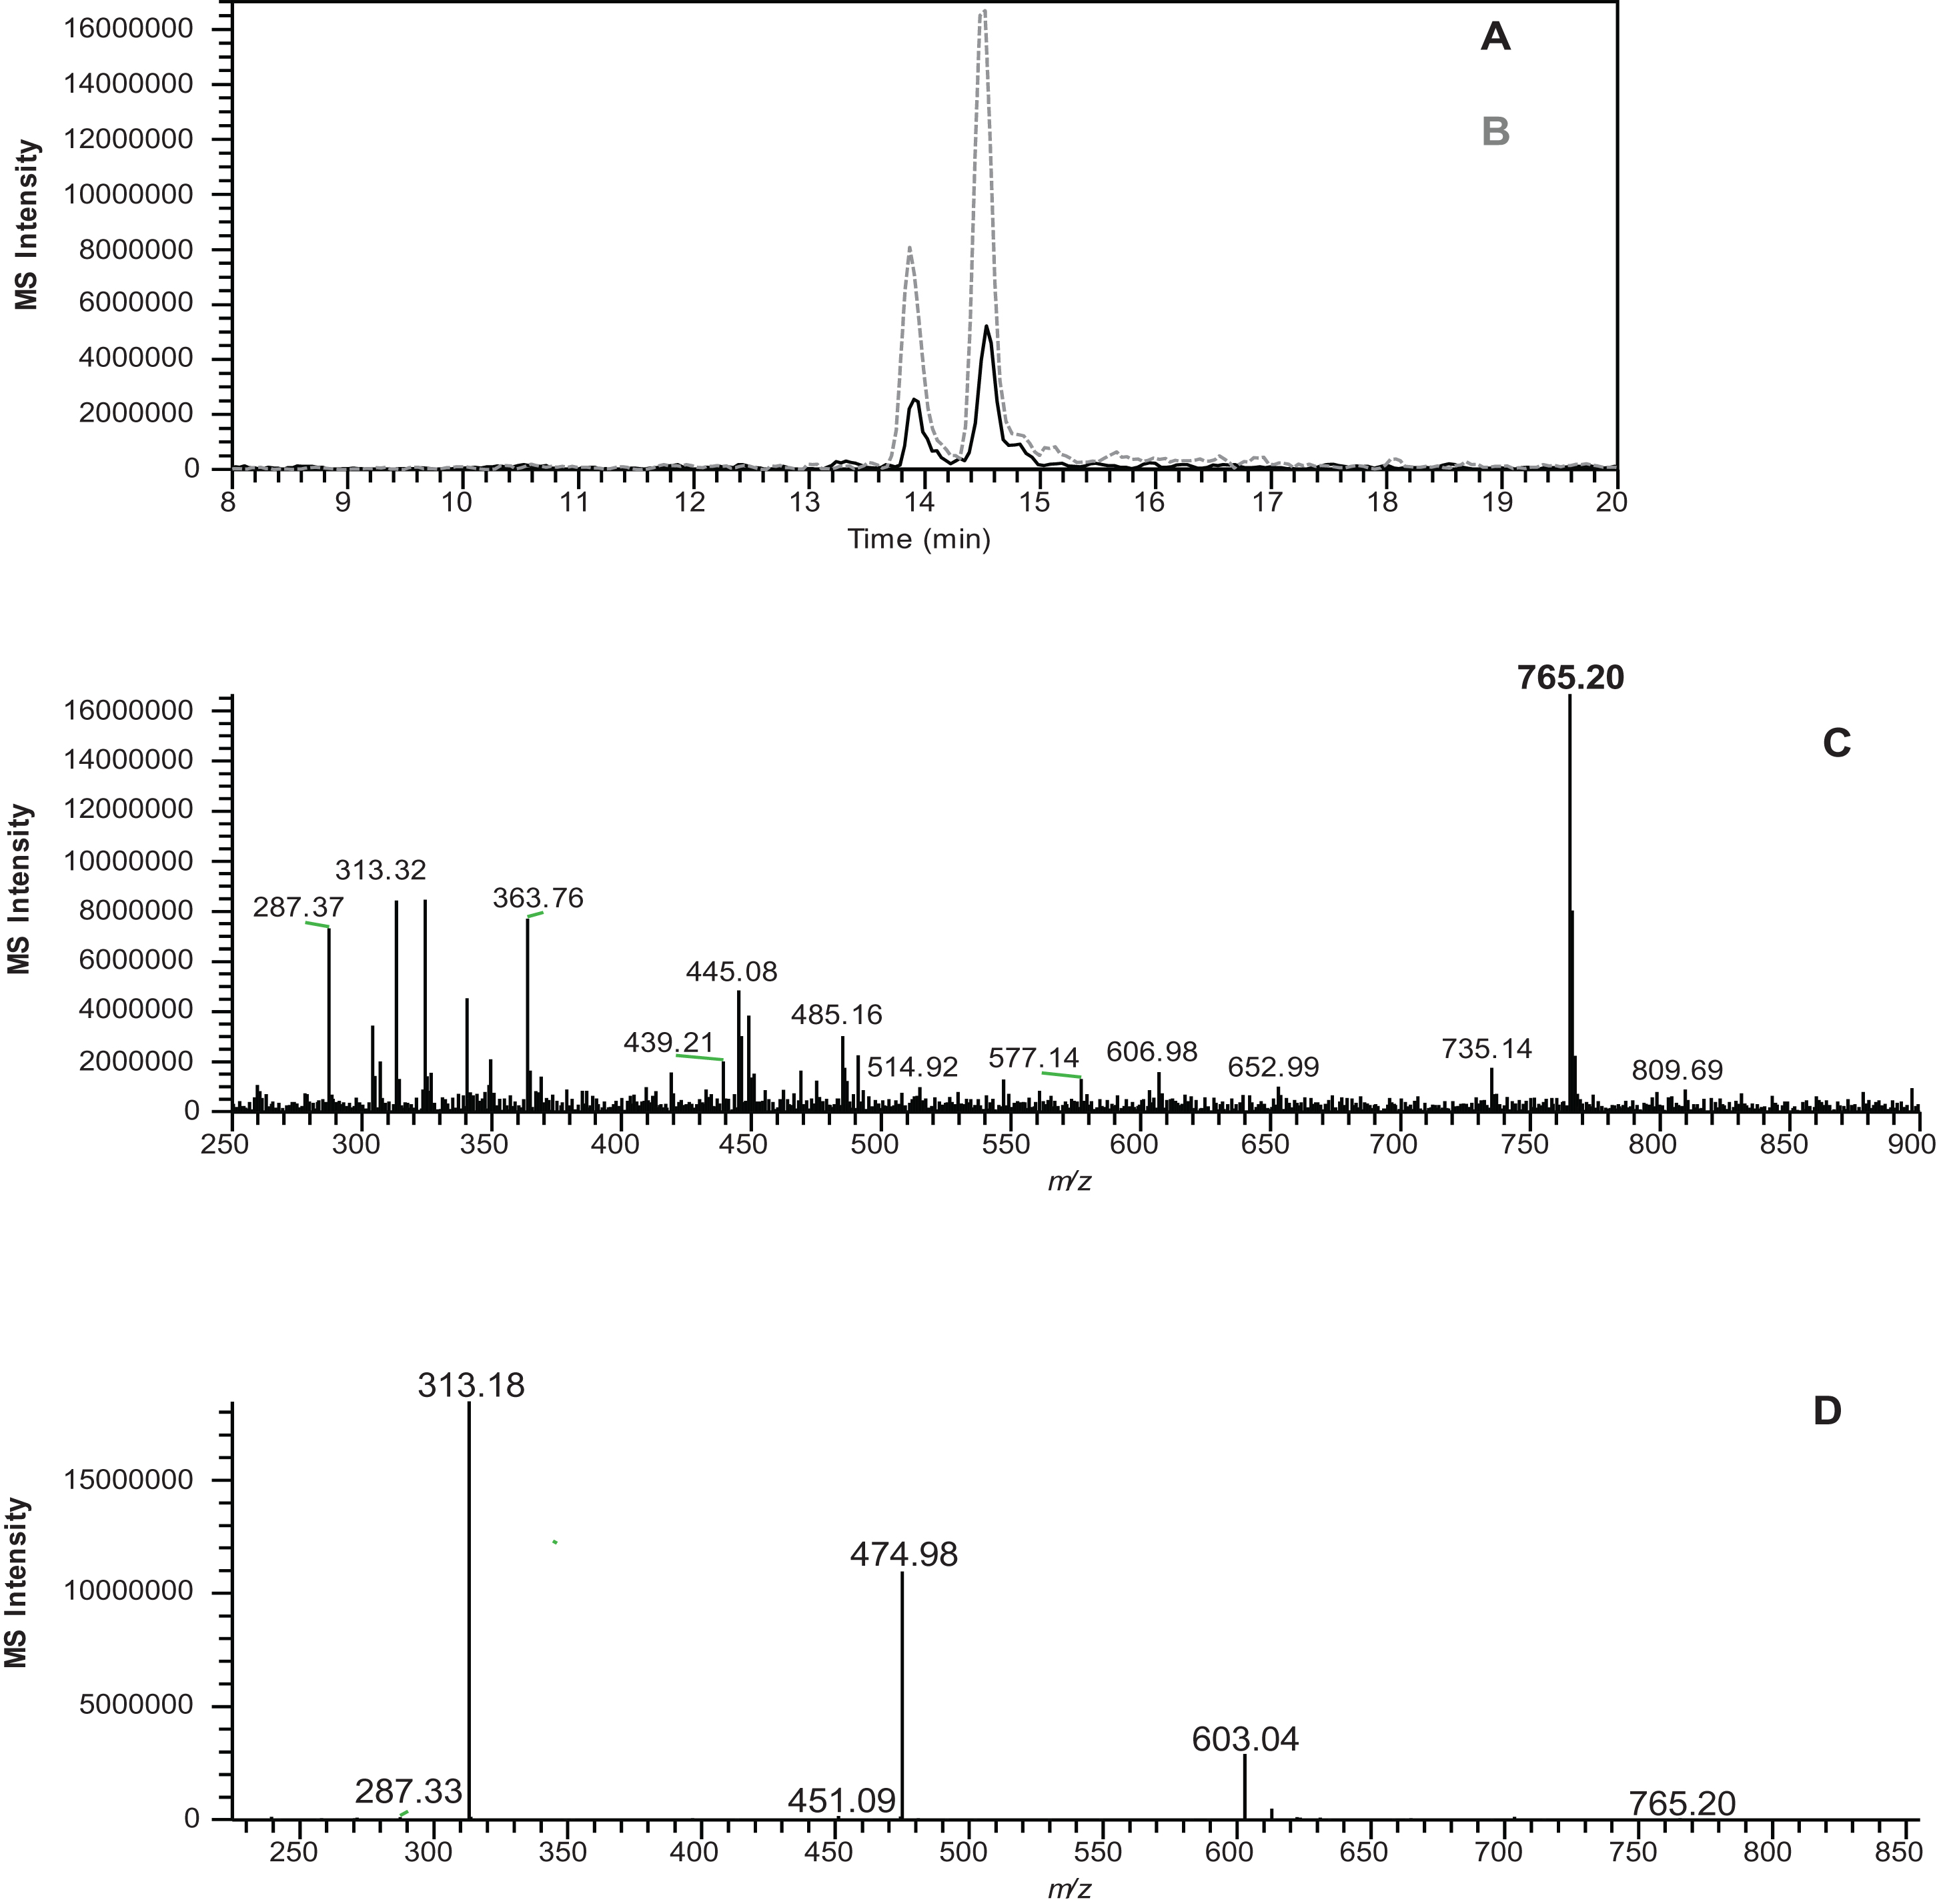 Fractionation of lingonberry m/z 765 component on Sephadex LH-20. Panel A shows the MS profile of original lingonberry sample at m/z [M+H]+ 765, Panel B shows the MS profile of LH-unbound sample at m/z [M+H]+ 765, Panel C shows the MS spectra & Panel D shows the MS2 spectra of m/z [M+H]+ 765. Data for panels C & D was taken from the LH-20 unbound fraction.